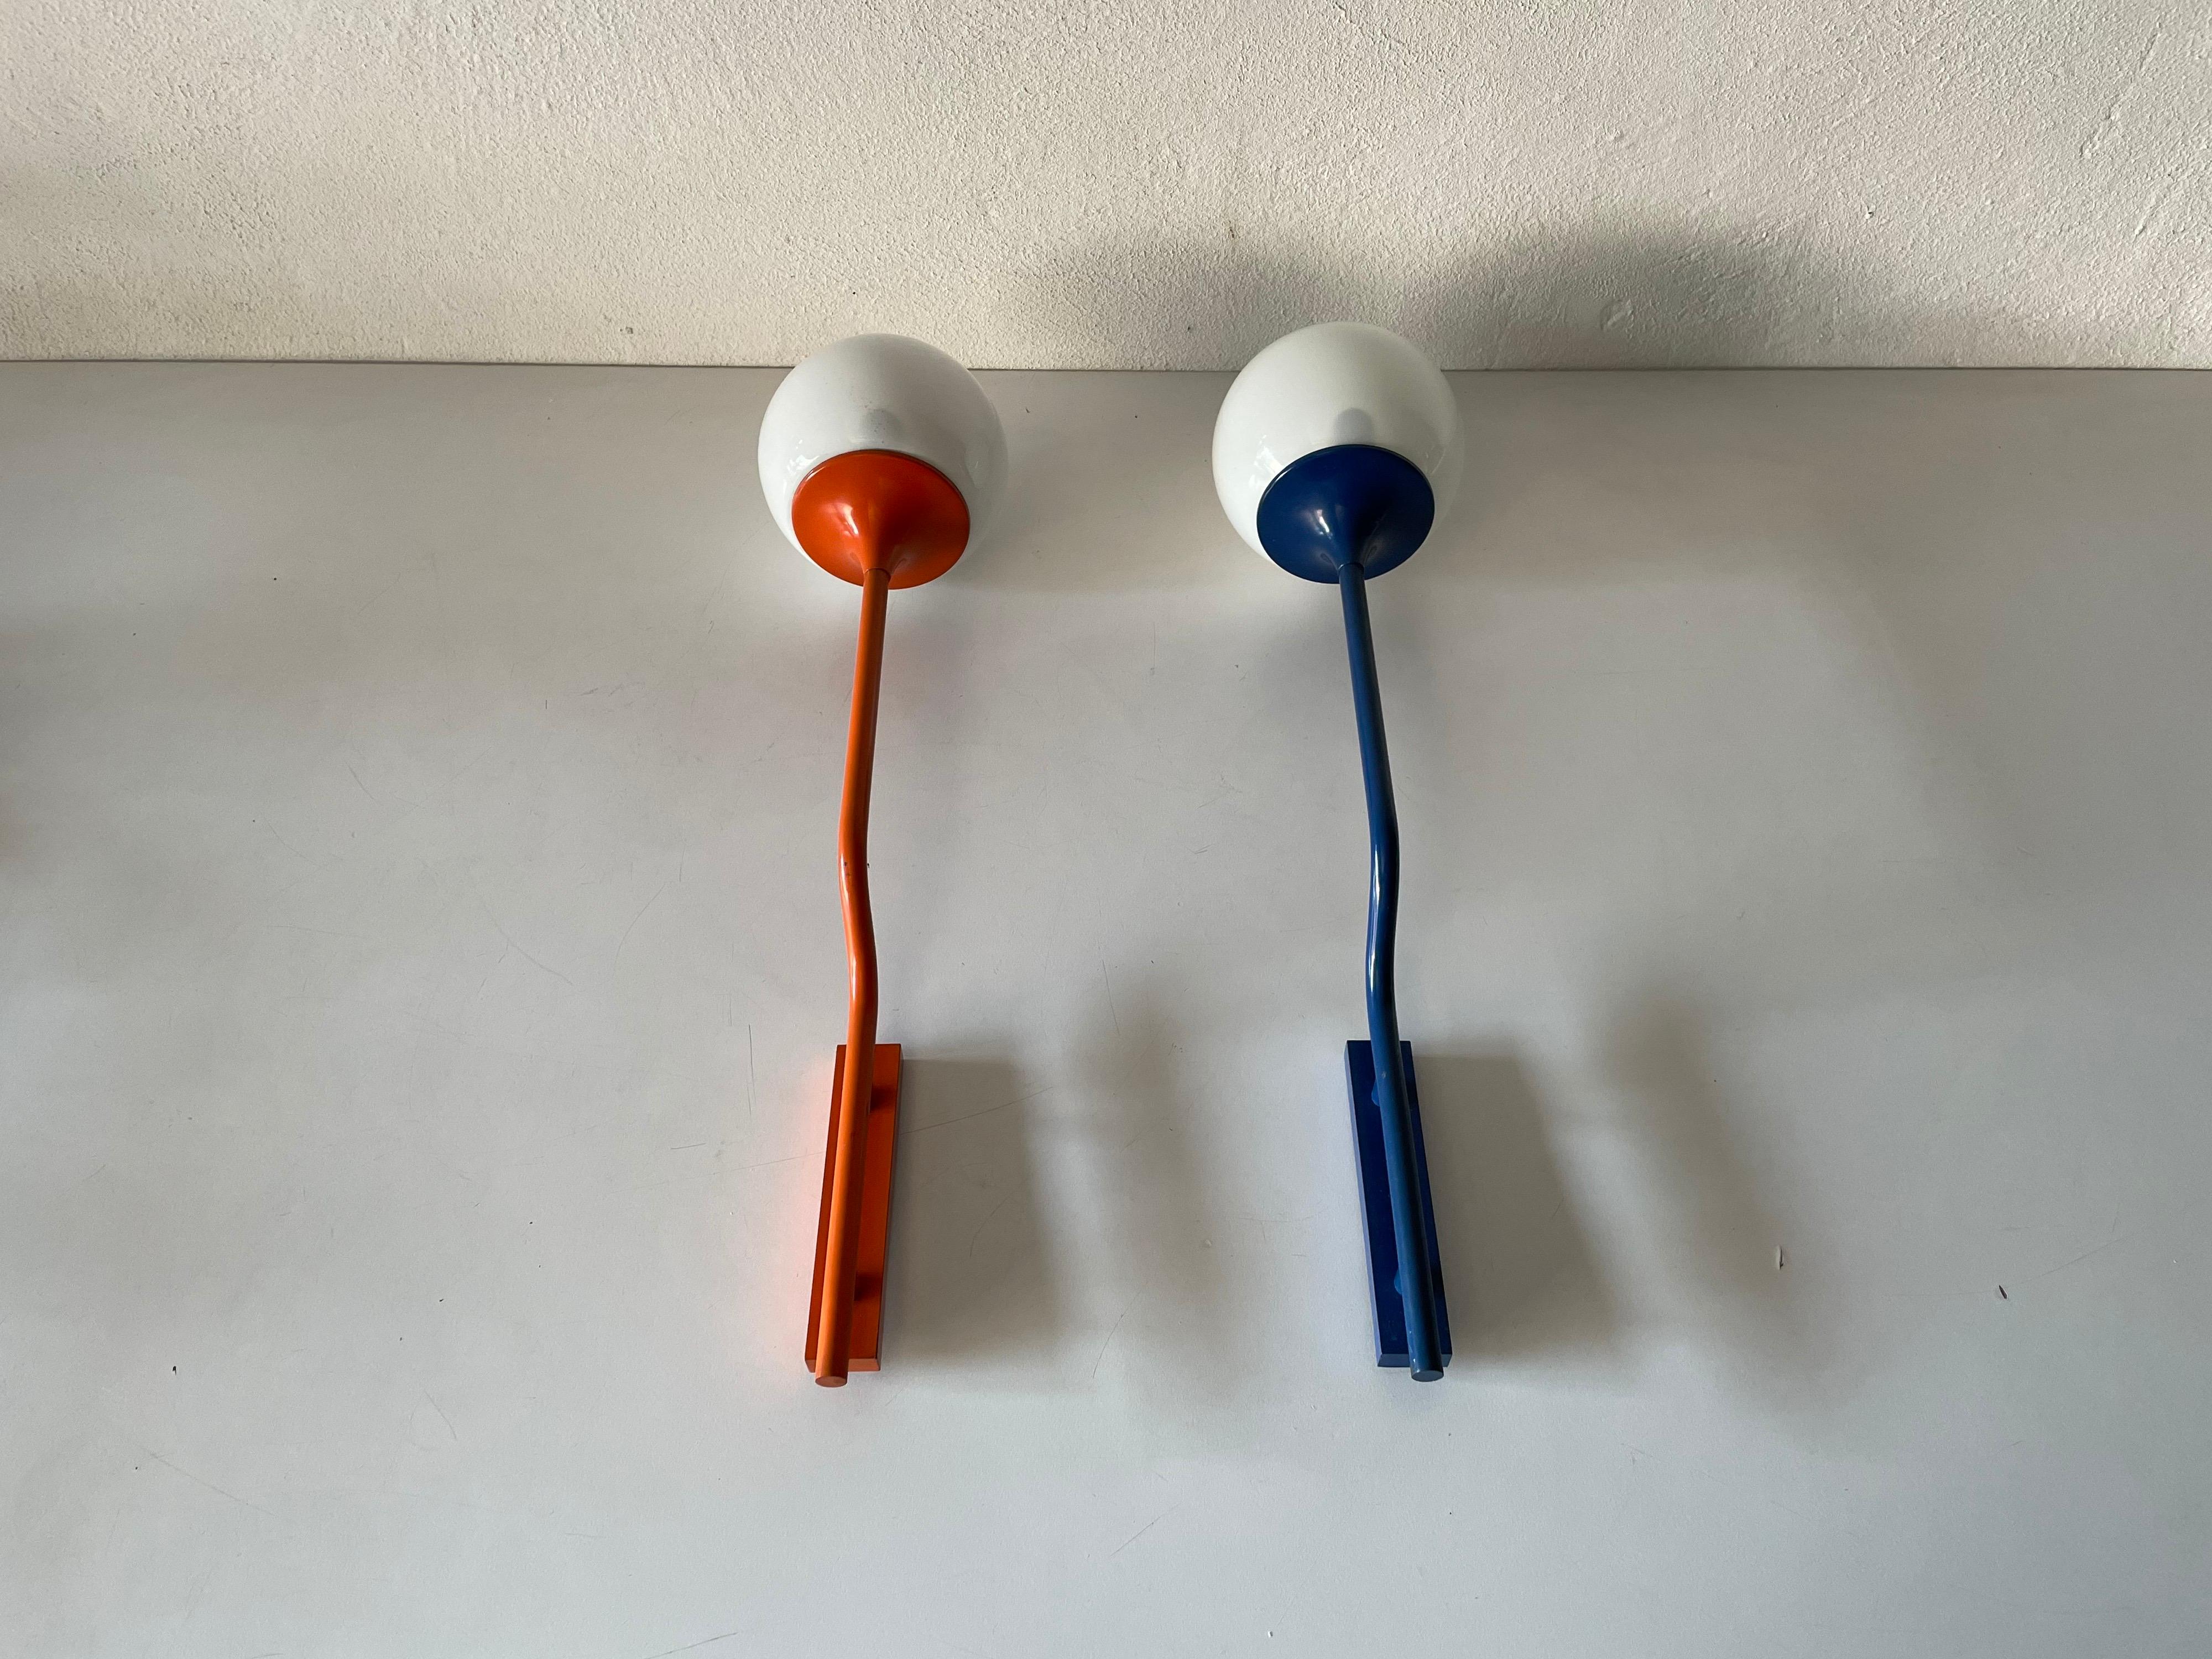 Very rare orange-Dark blue long metal body and glass pair of sconces by Reggiani, 1970s, Italy

Minimalist high quality design

Lamps are in very good vintage condition.
Wear consistent with age and use

These lamps works with E14 standard